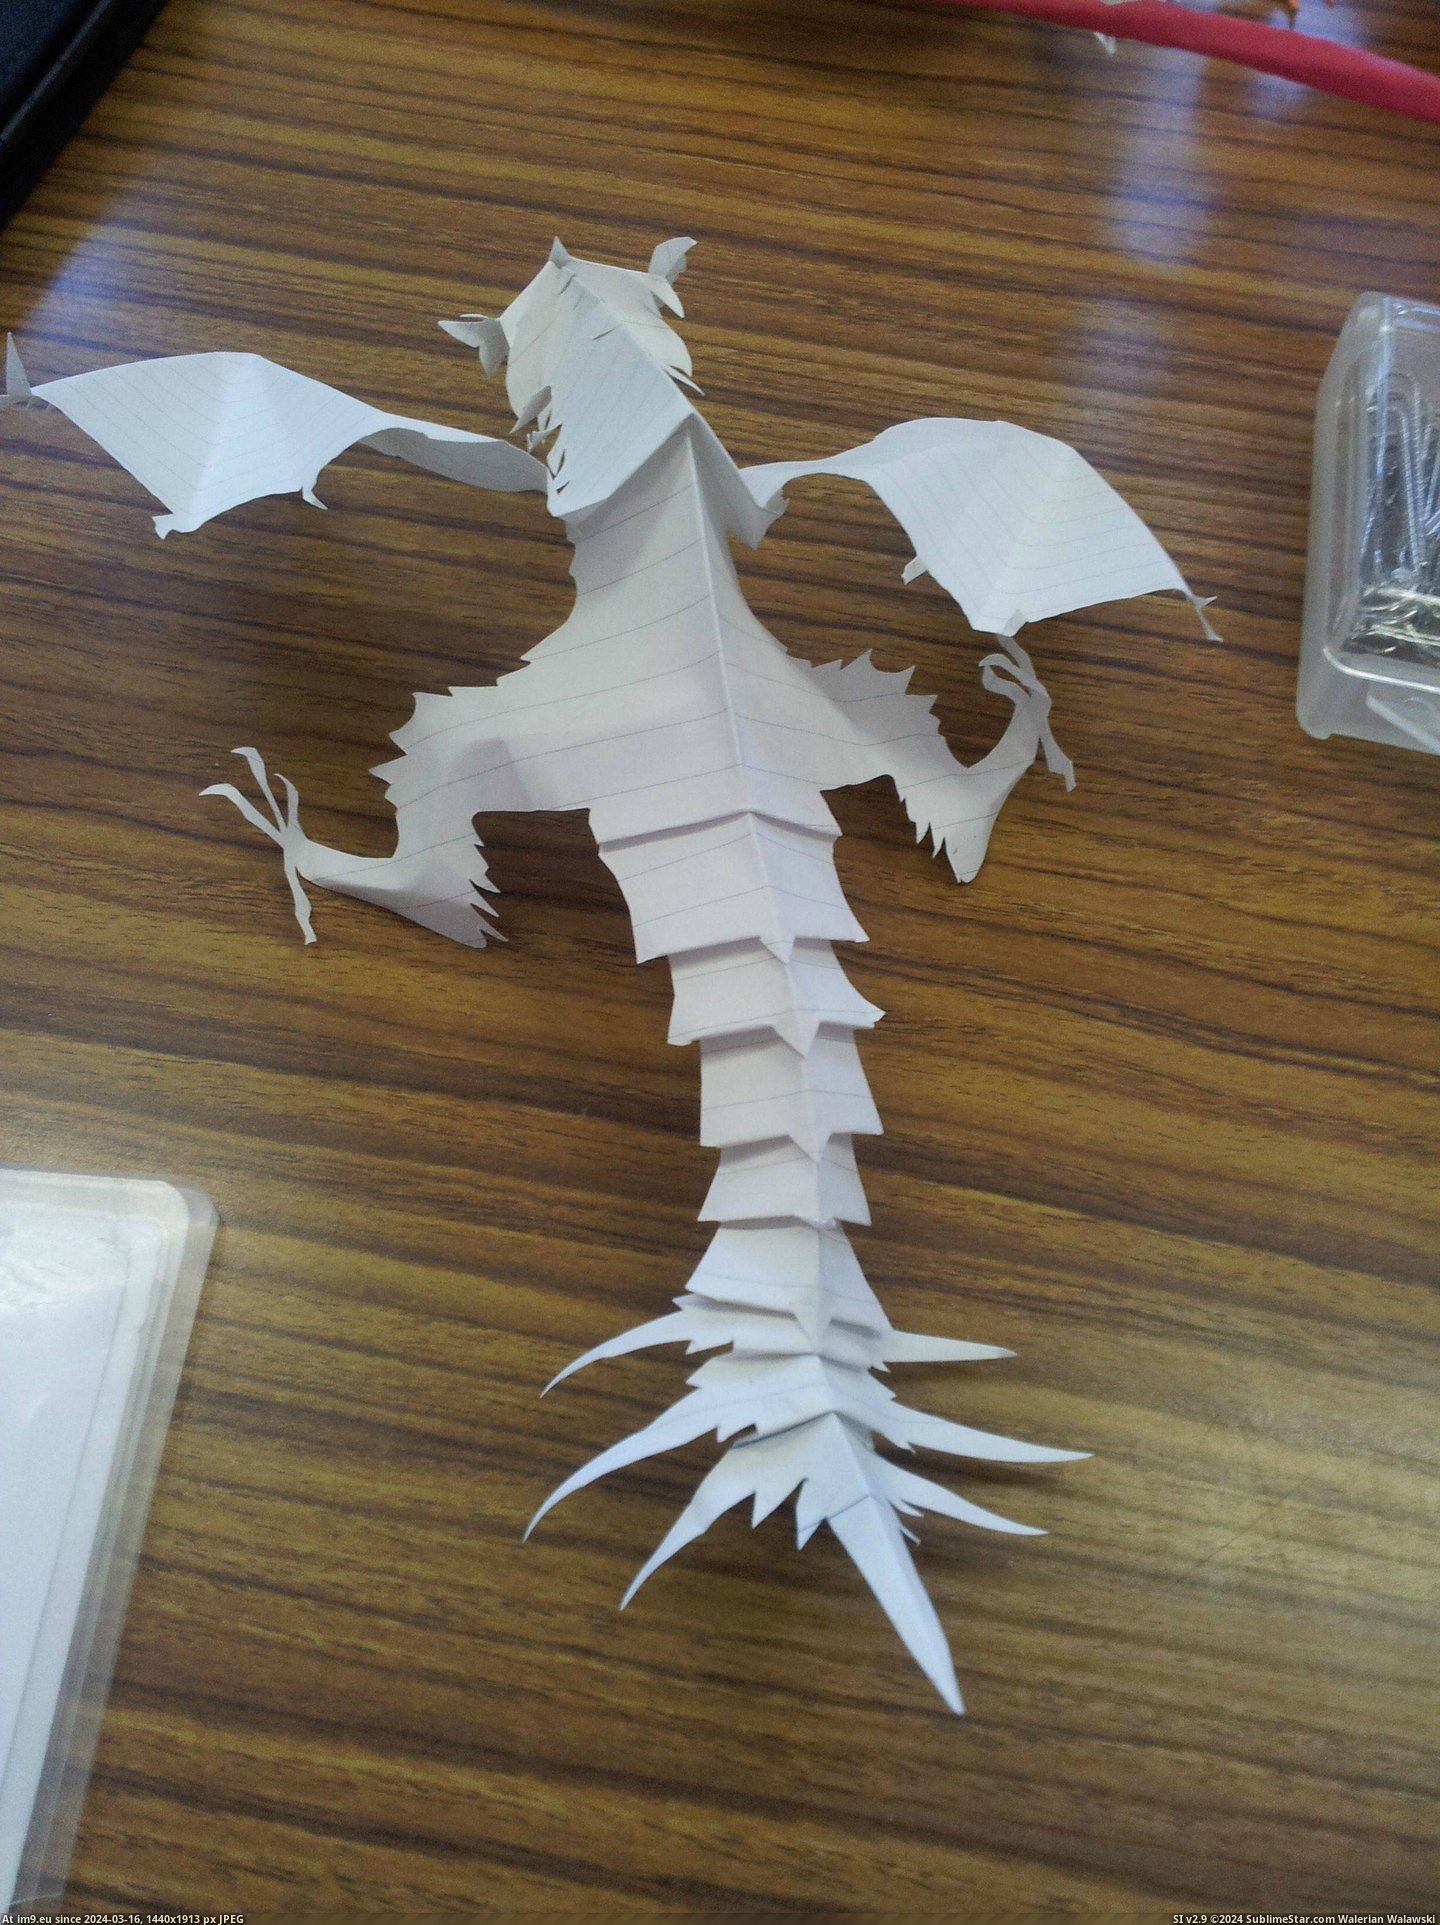 #One #Paper #Students #Creatures #Freehand #Bored #Completely [Pics] One of my students makes these creatures out of paper completely freehand whenever he is bored 2 Pic. (Obraz z album My r/PICS favs))